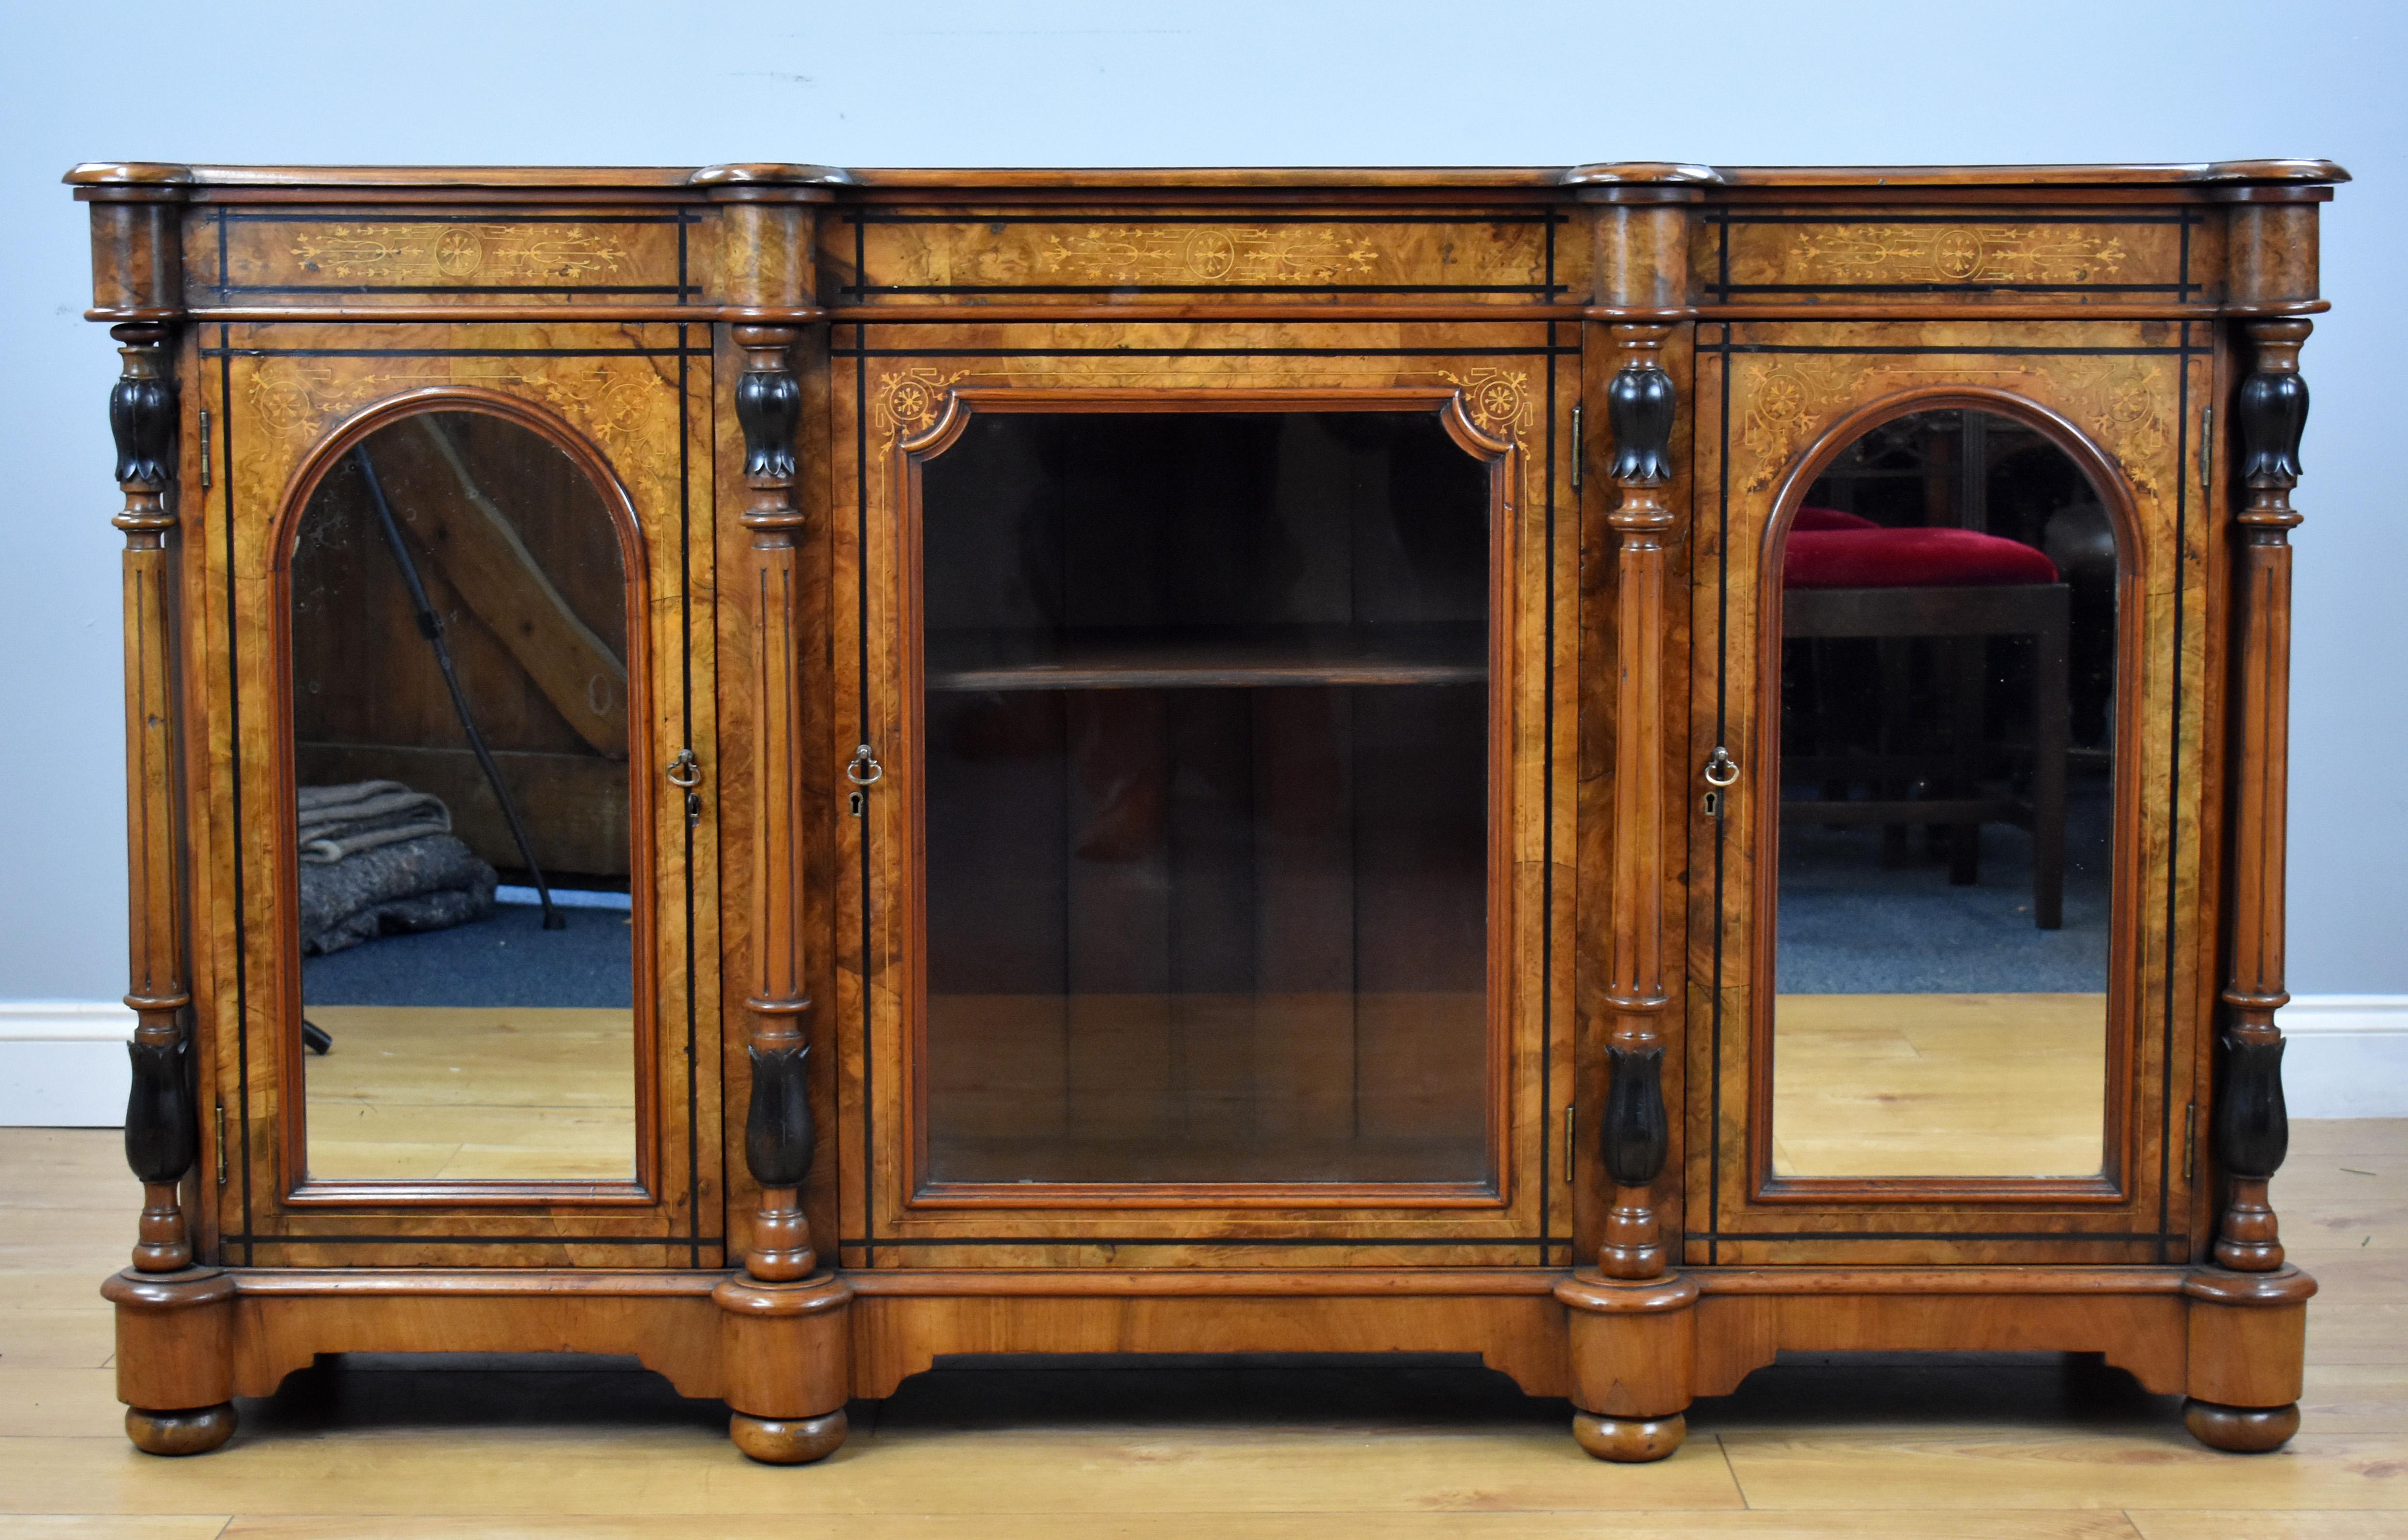 For sale is a Victorian burr walnut inlaid credenza, having a mirror door either side of a central glass door, flanked by columns. This piece is in good condition, showing minor signs of wear commensurate with age and use.

Measures: Width 62.5